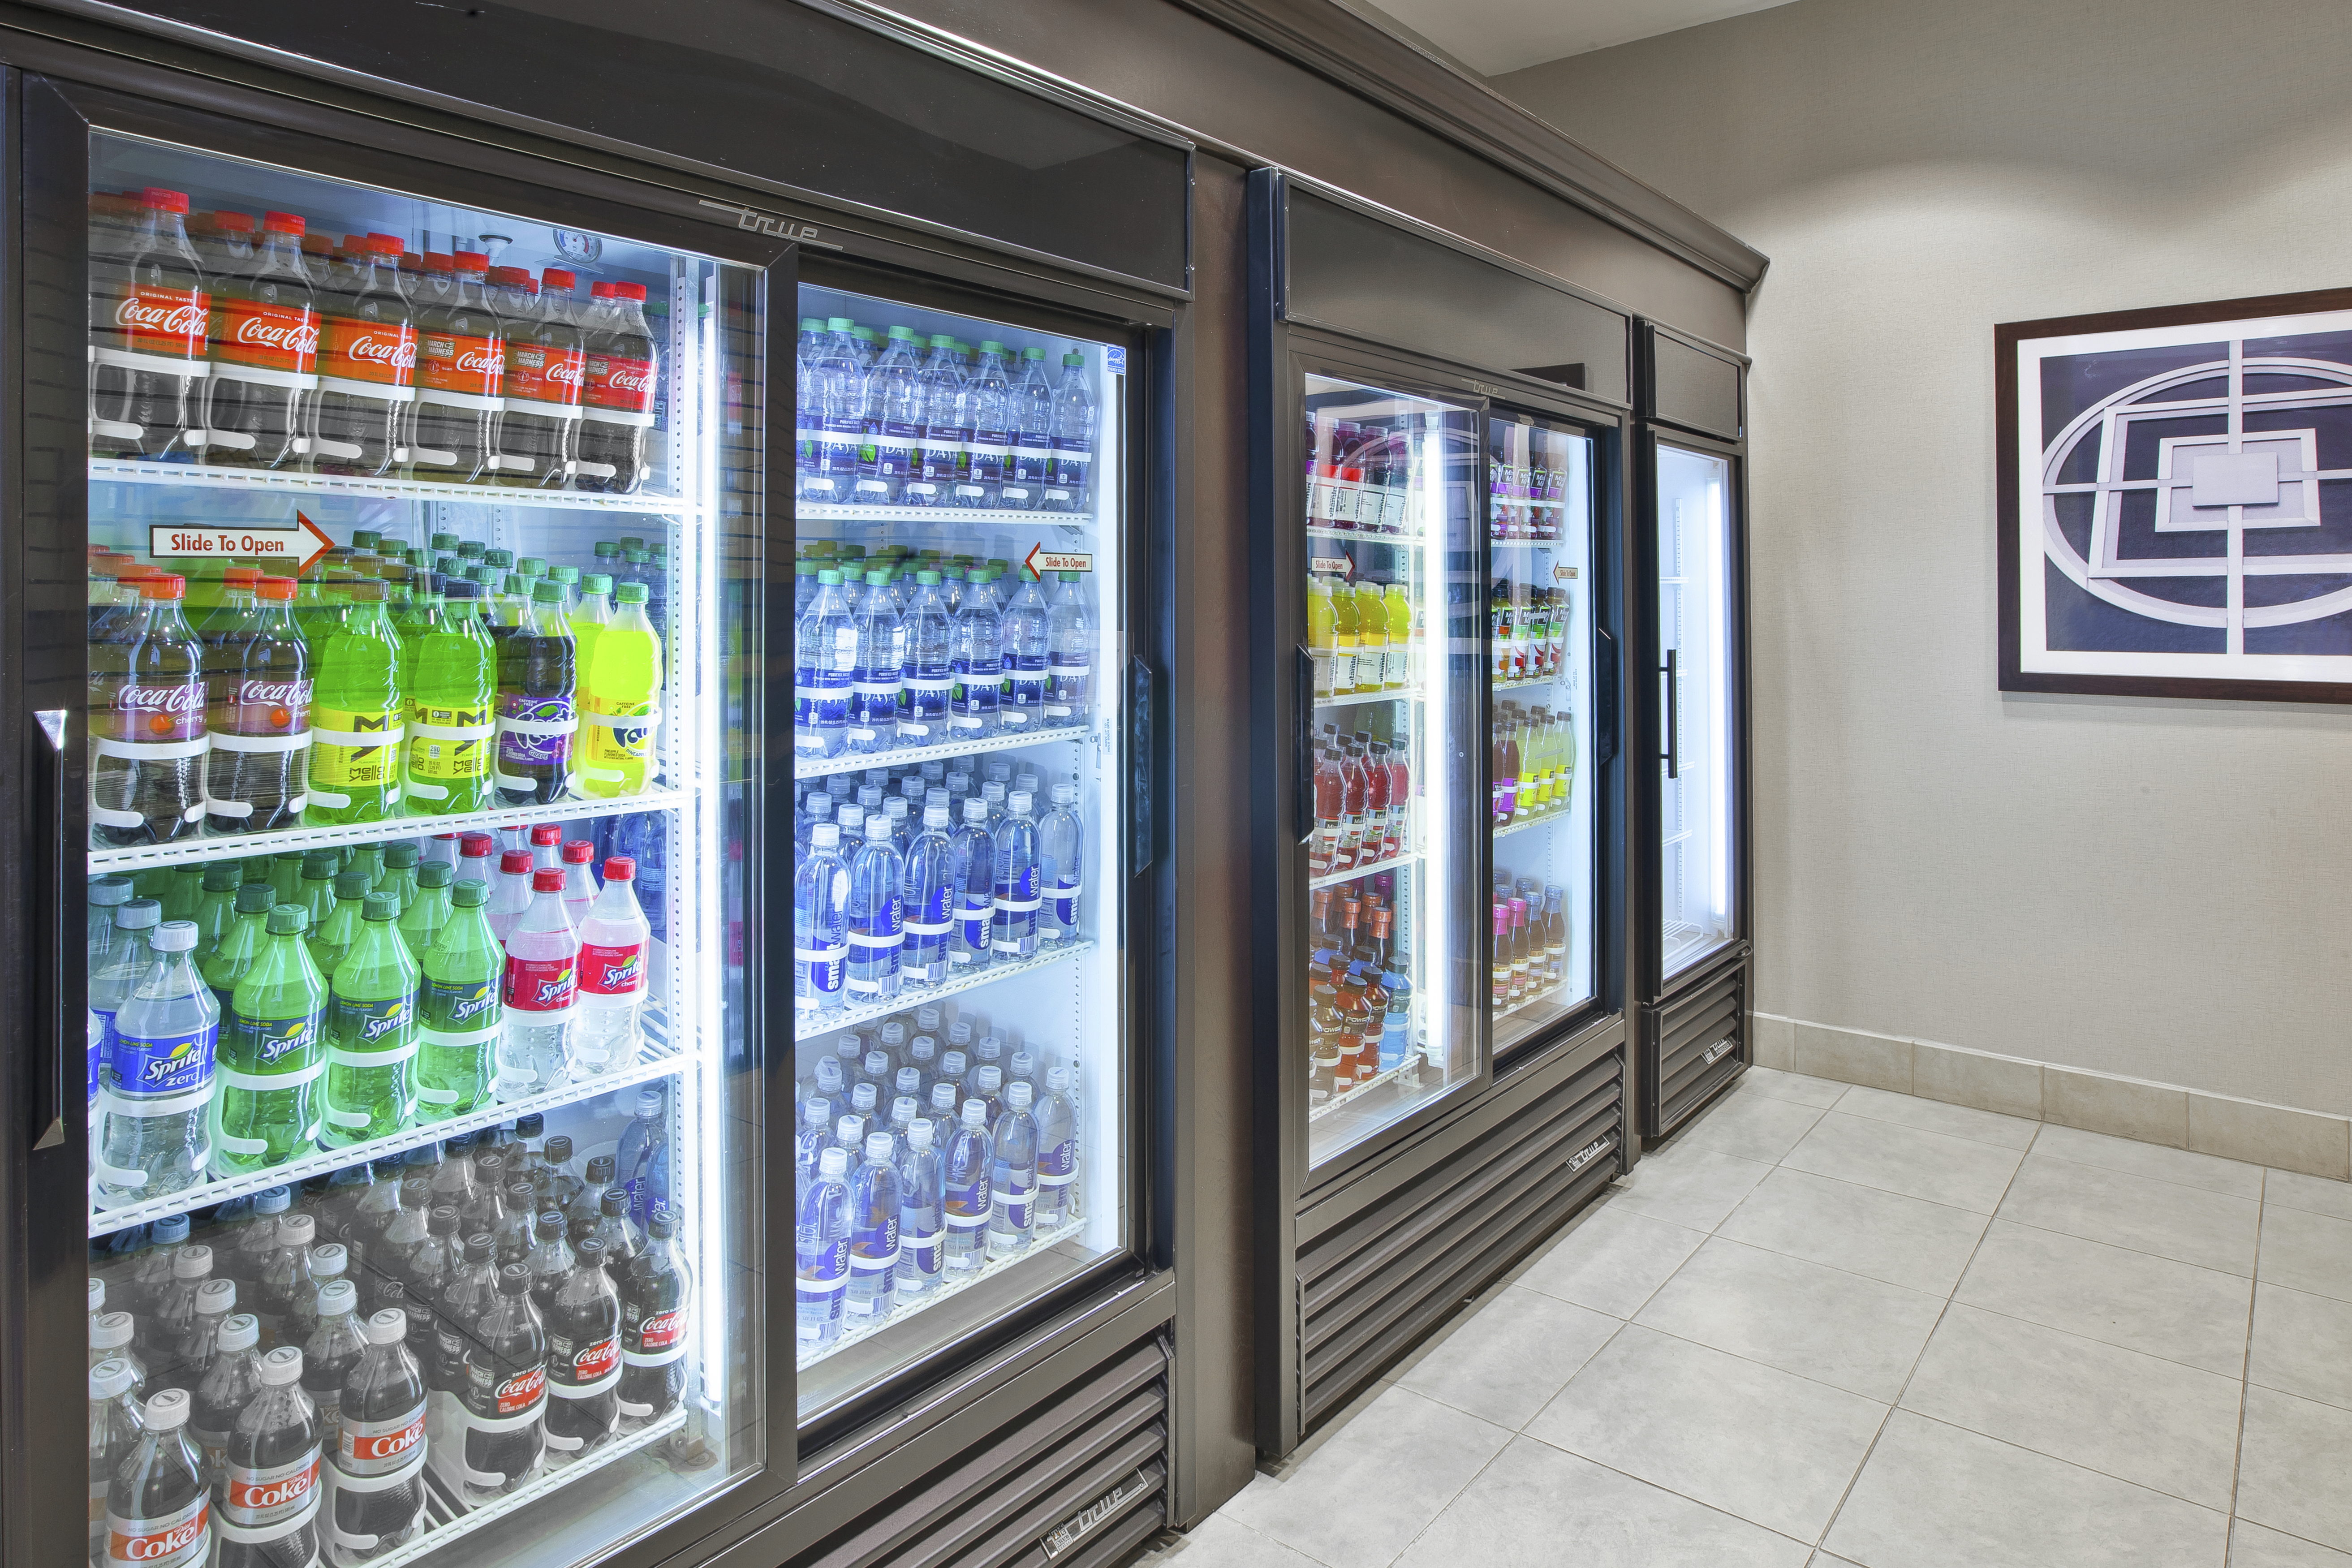 Frozen and Cold Refrigerated Items in Suite Shop